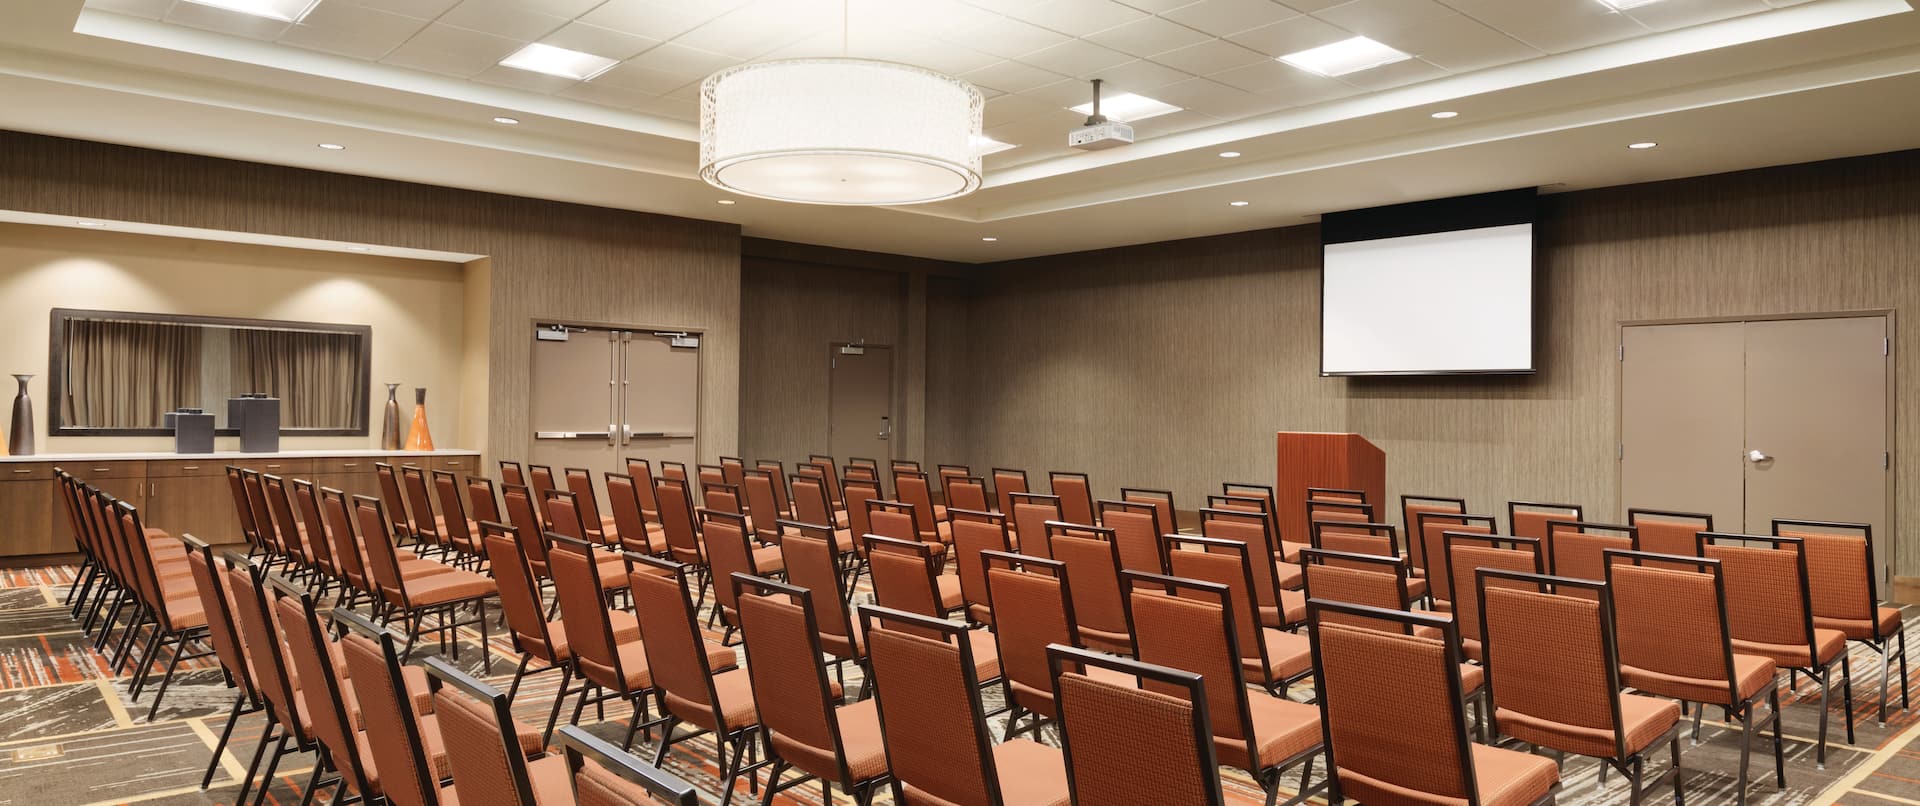 Mojave Meeting Room with Theater Seating and Projector Screen